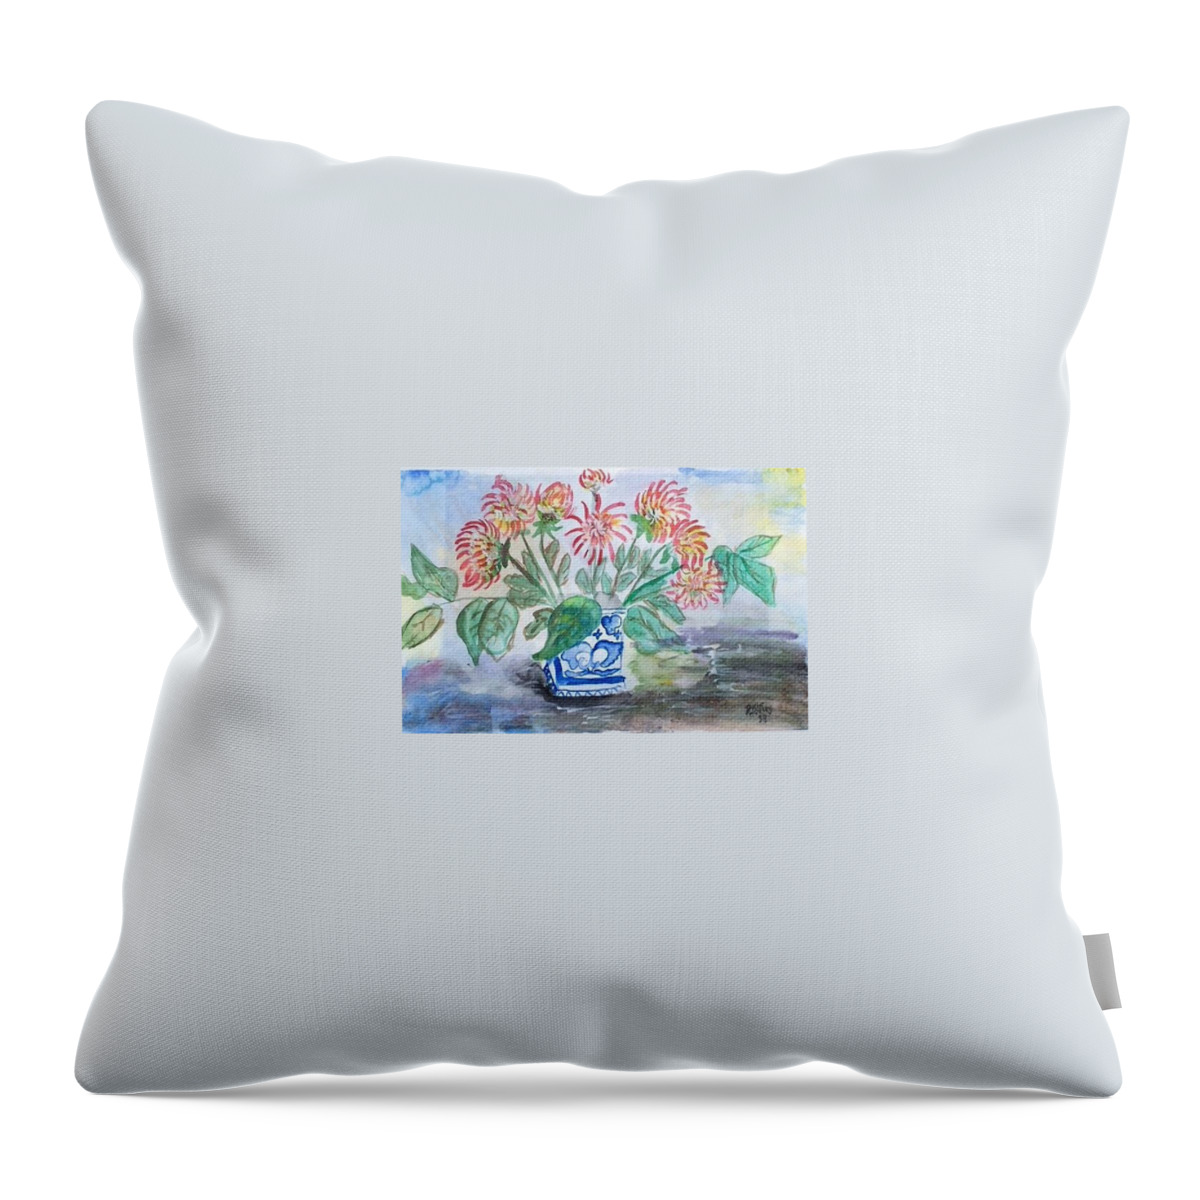 Watercolor Throw Pillow featuring the painting Dahlias in blue vase by Dottie Visker